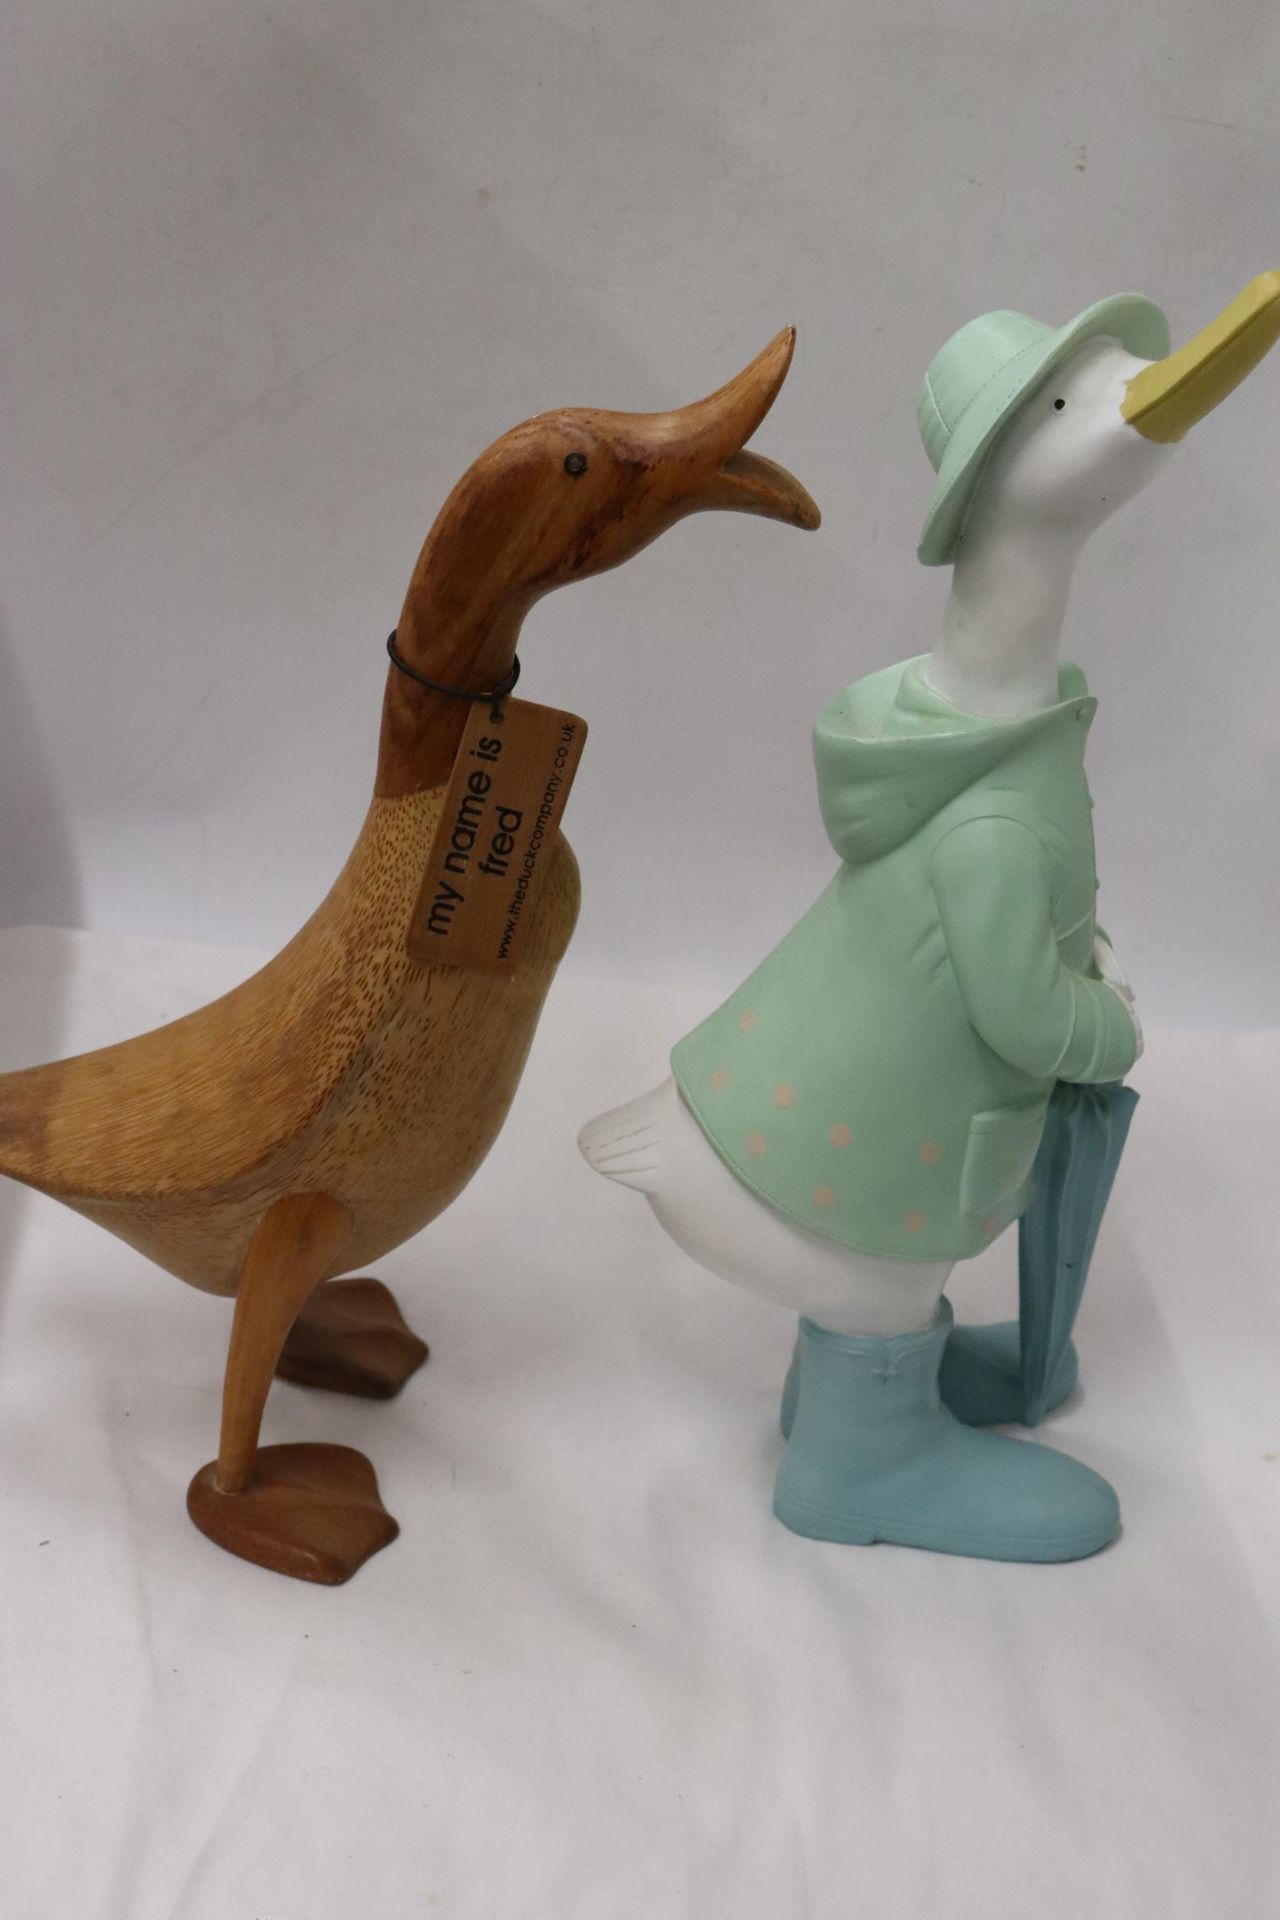 A WOODEN DUCK FROM 'THE DUCK COMPANY' CALLED FRED PLUS A PAINTED DUCK, HEIGHTS 42CM - Image 2 of 7